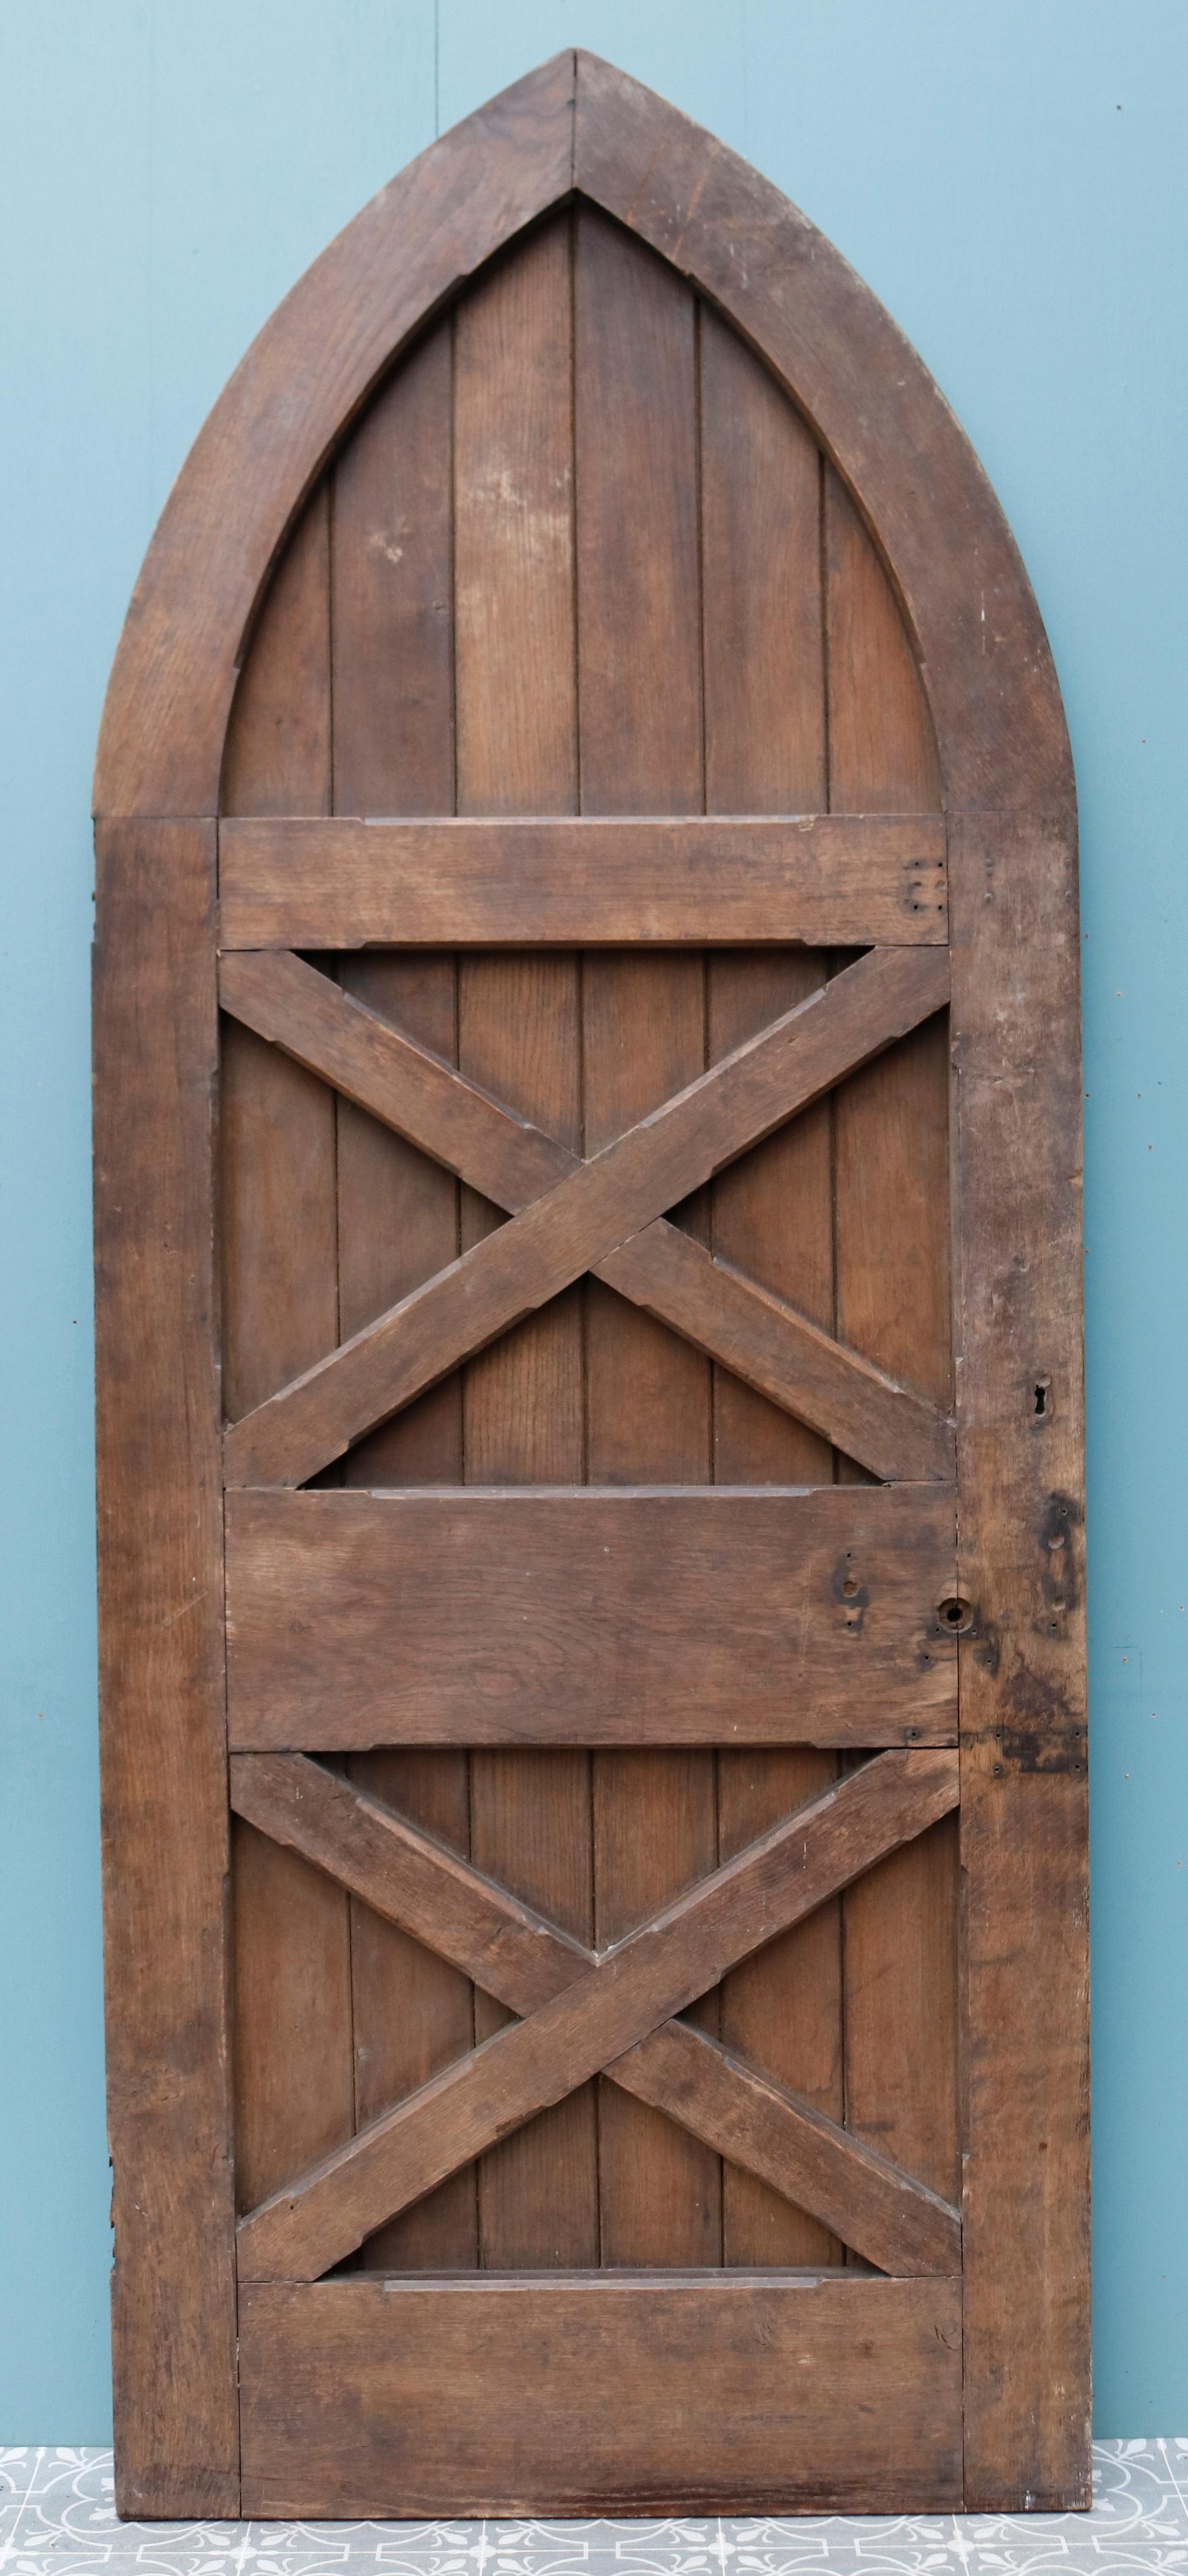 A Victorian Gothic style arched front door constructed from oak with decorative wrought iron hinges.